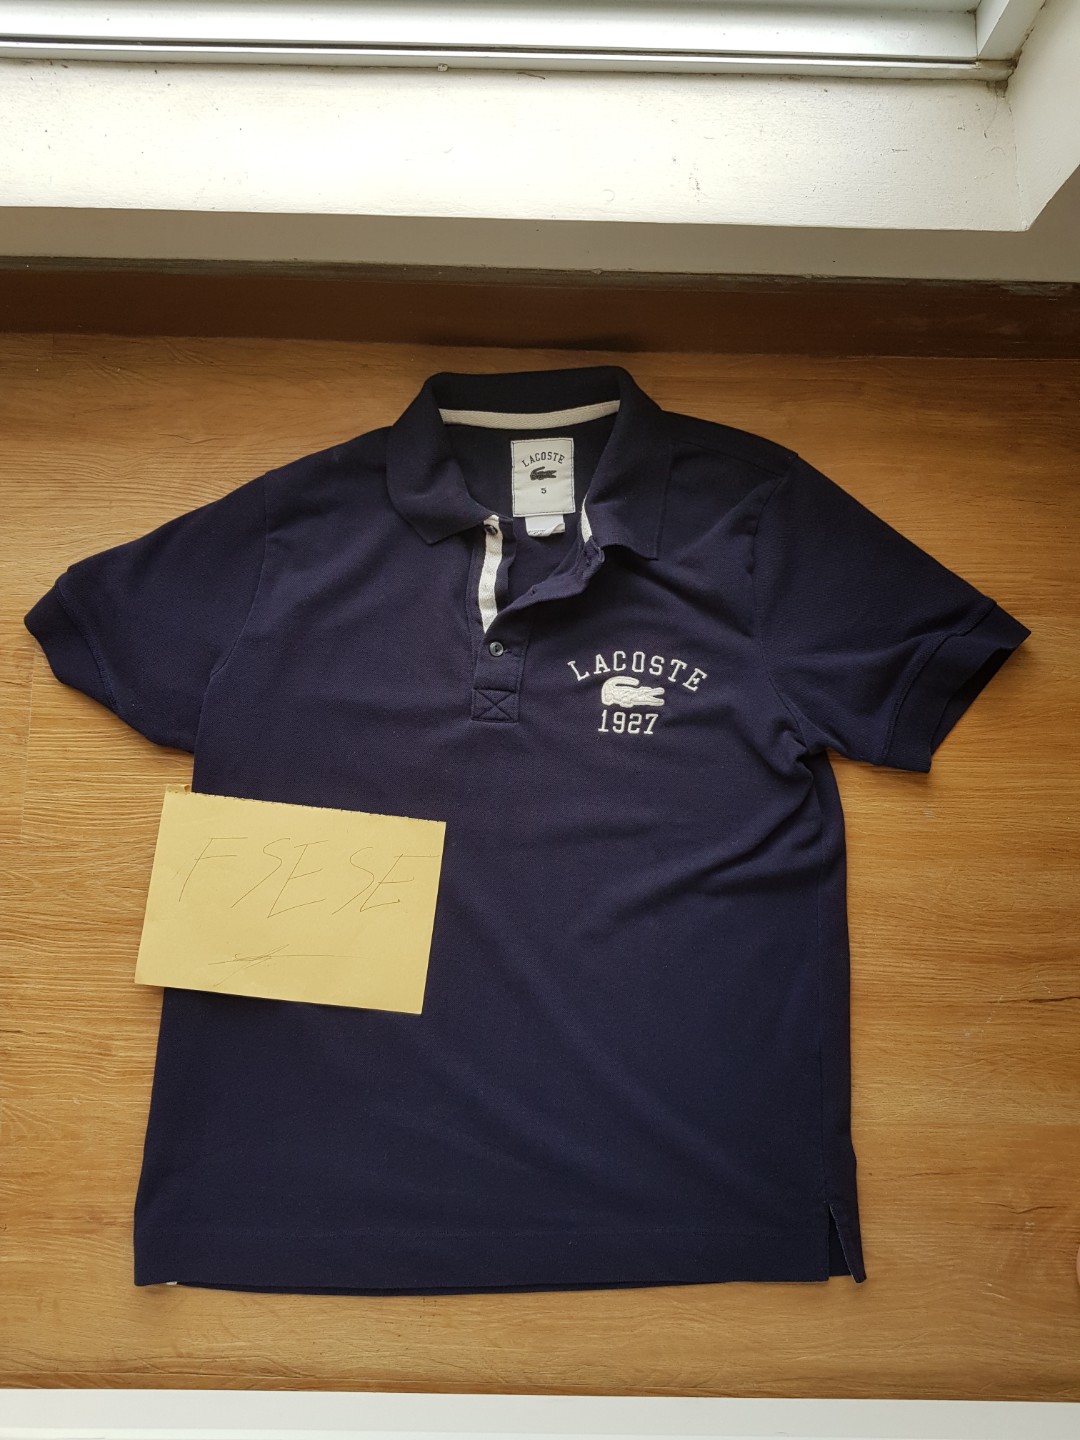 lacoste polo shirt 1927, OFF 71%,Buy!